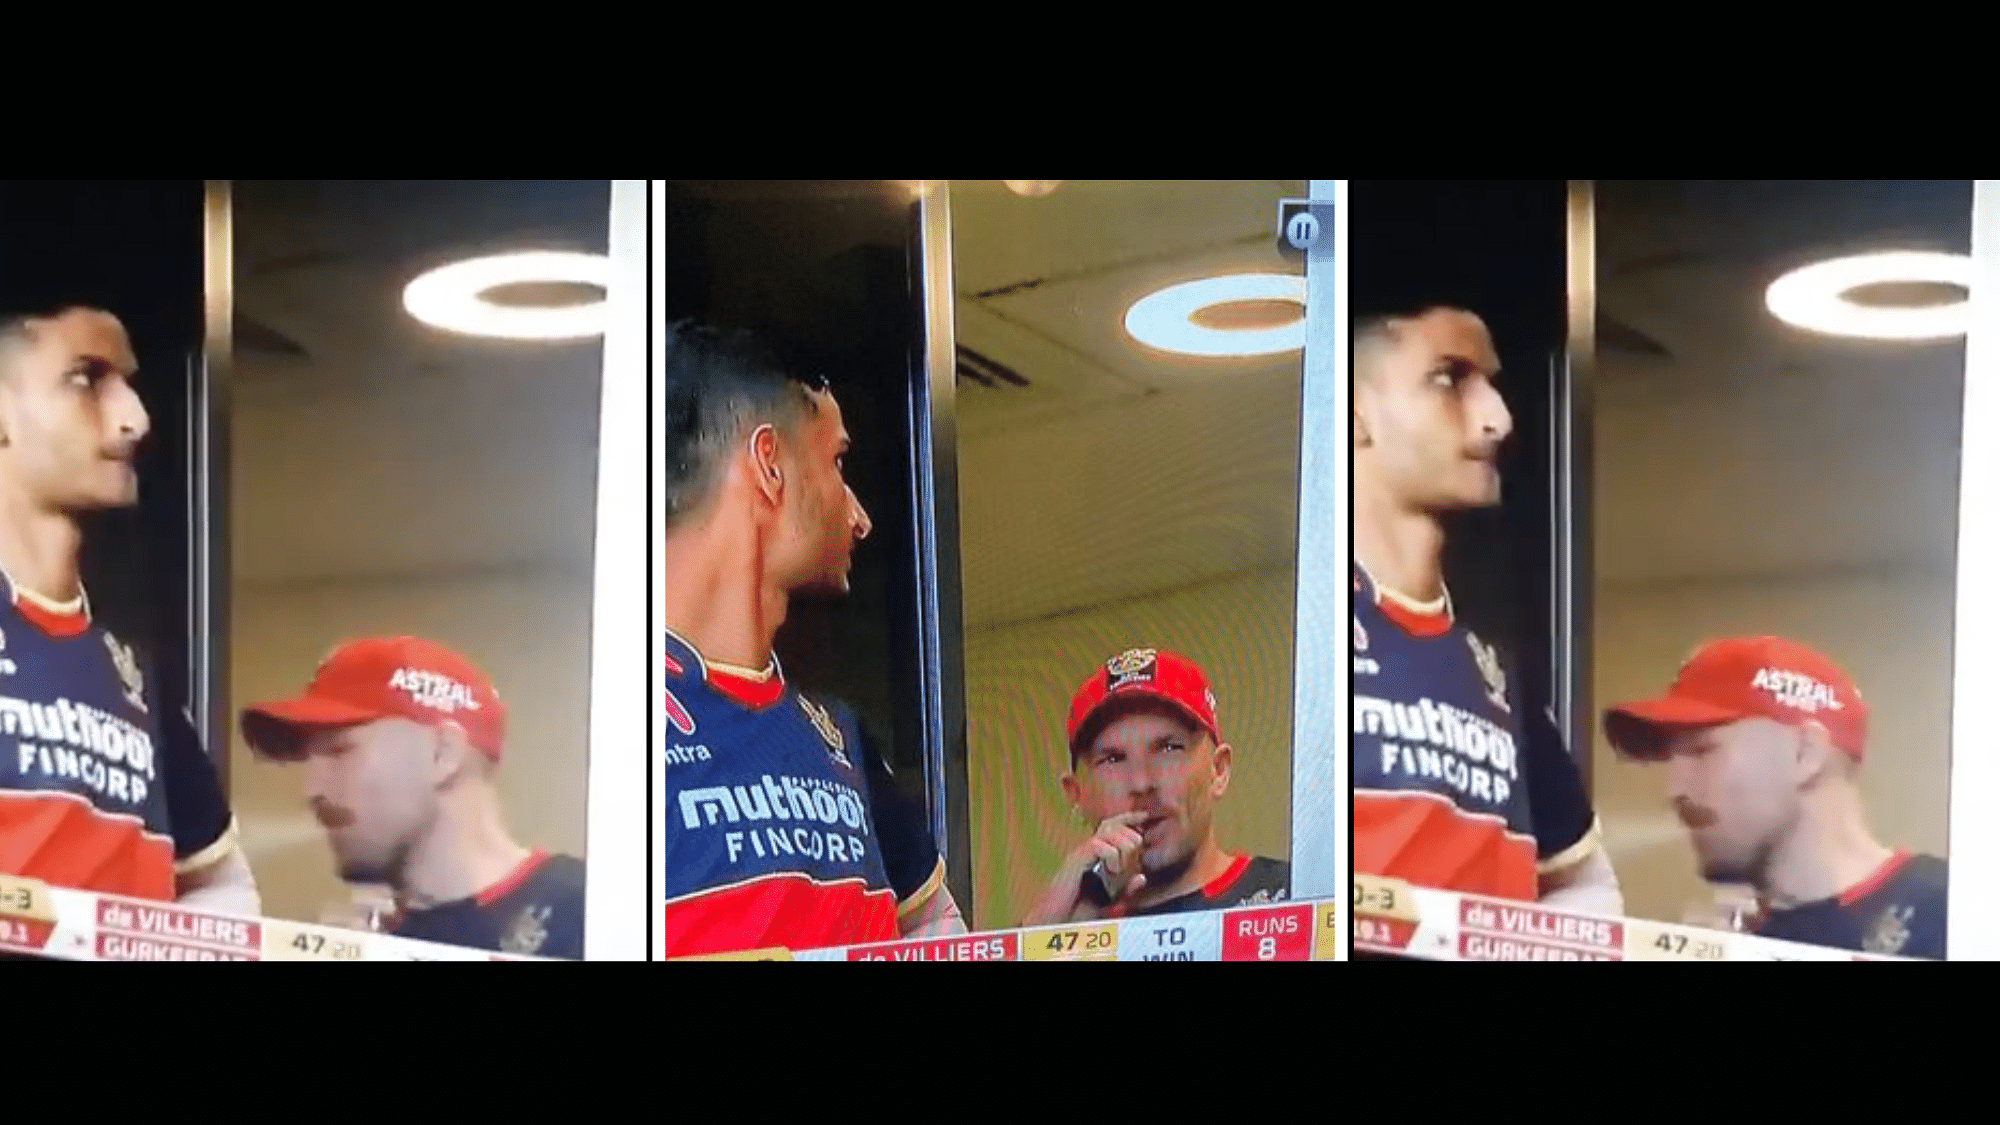 Aaron Finch was spotted vaping during RCB’s IPL 2020 match against RR on Saturday evening.